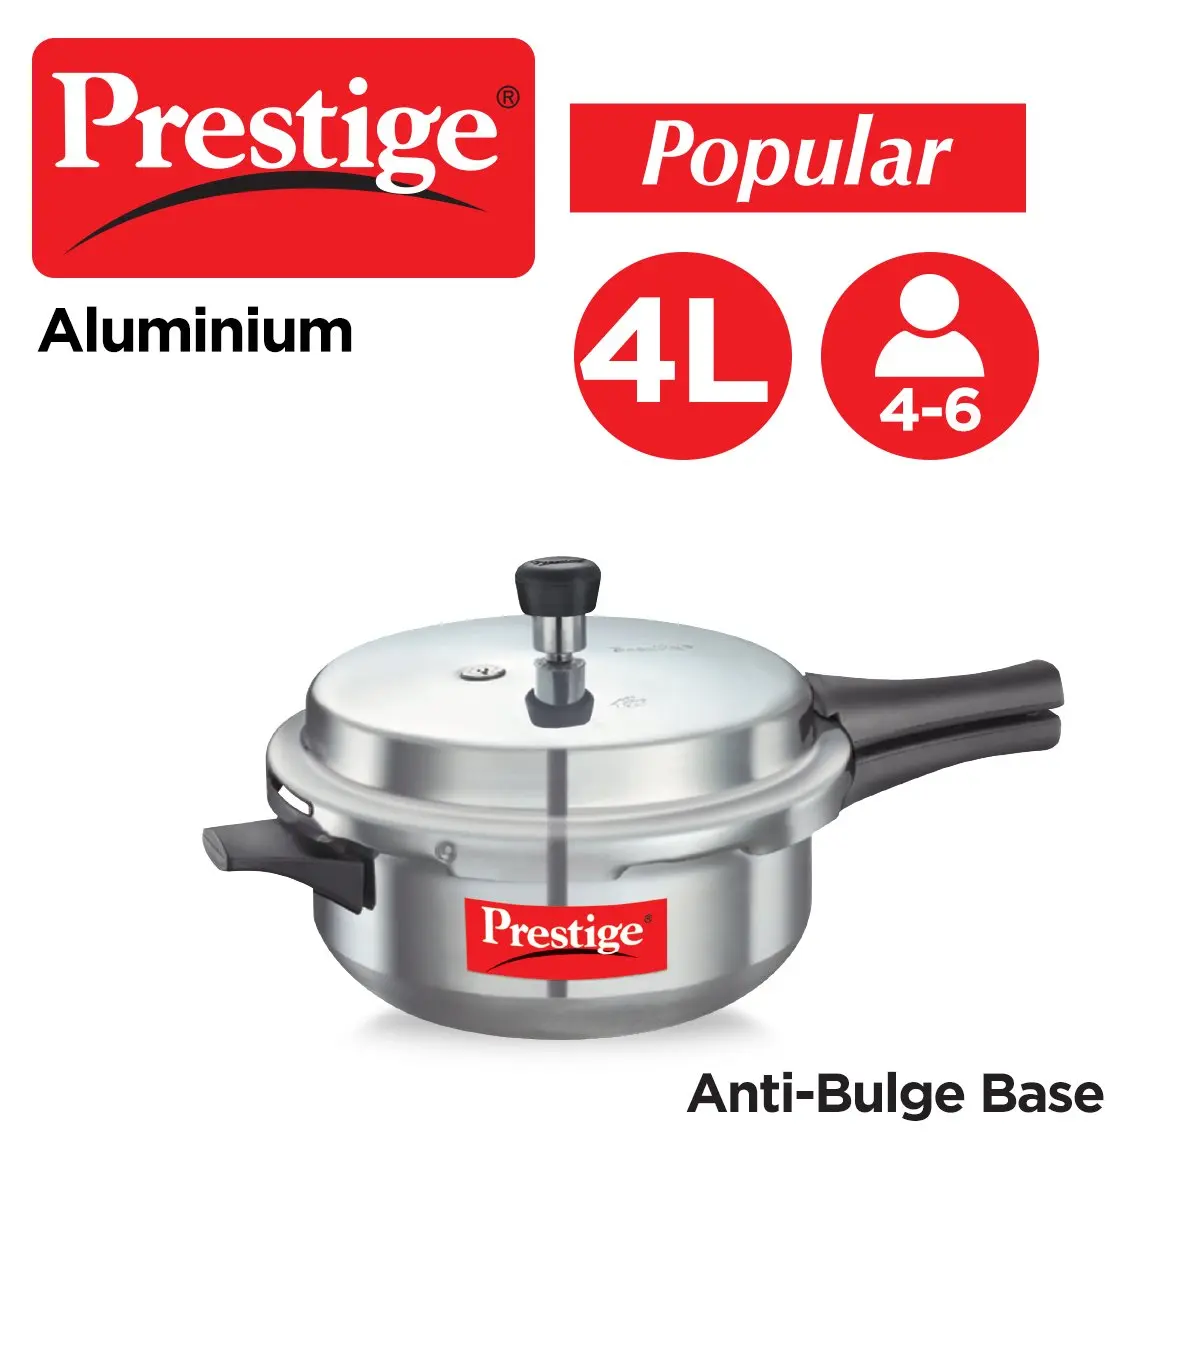 Prestige Popular Aluminium Pan Pressure Cookers with Outer Lid - 10025 - 2